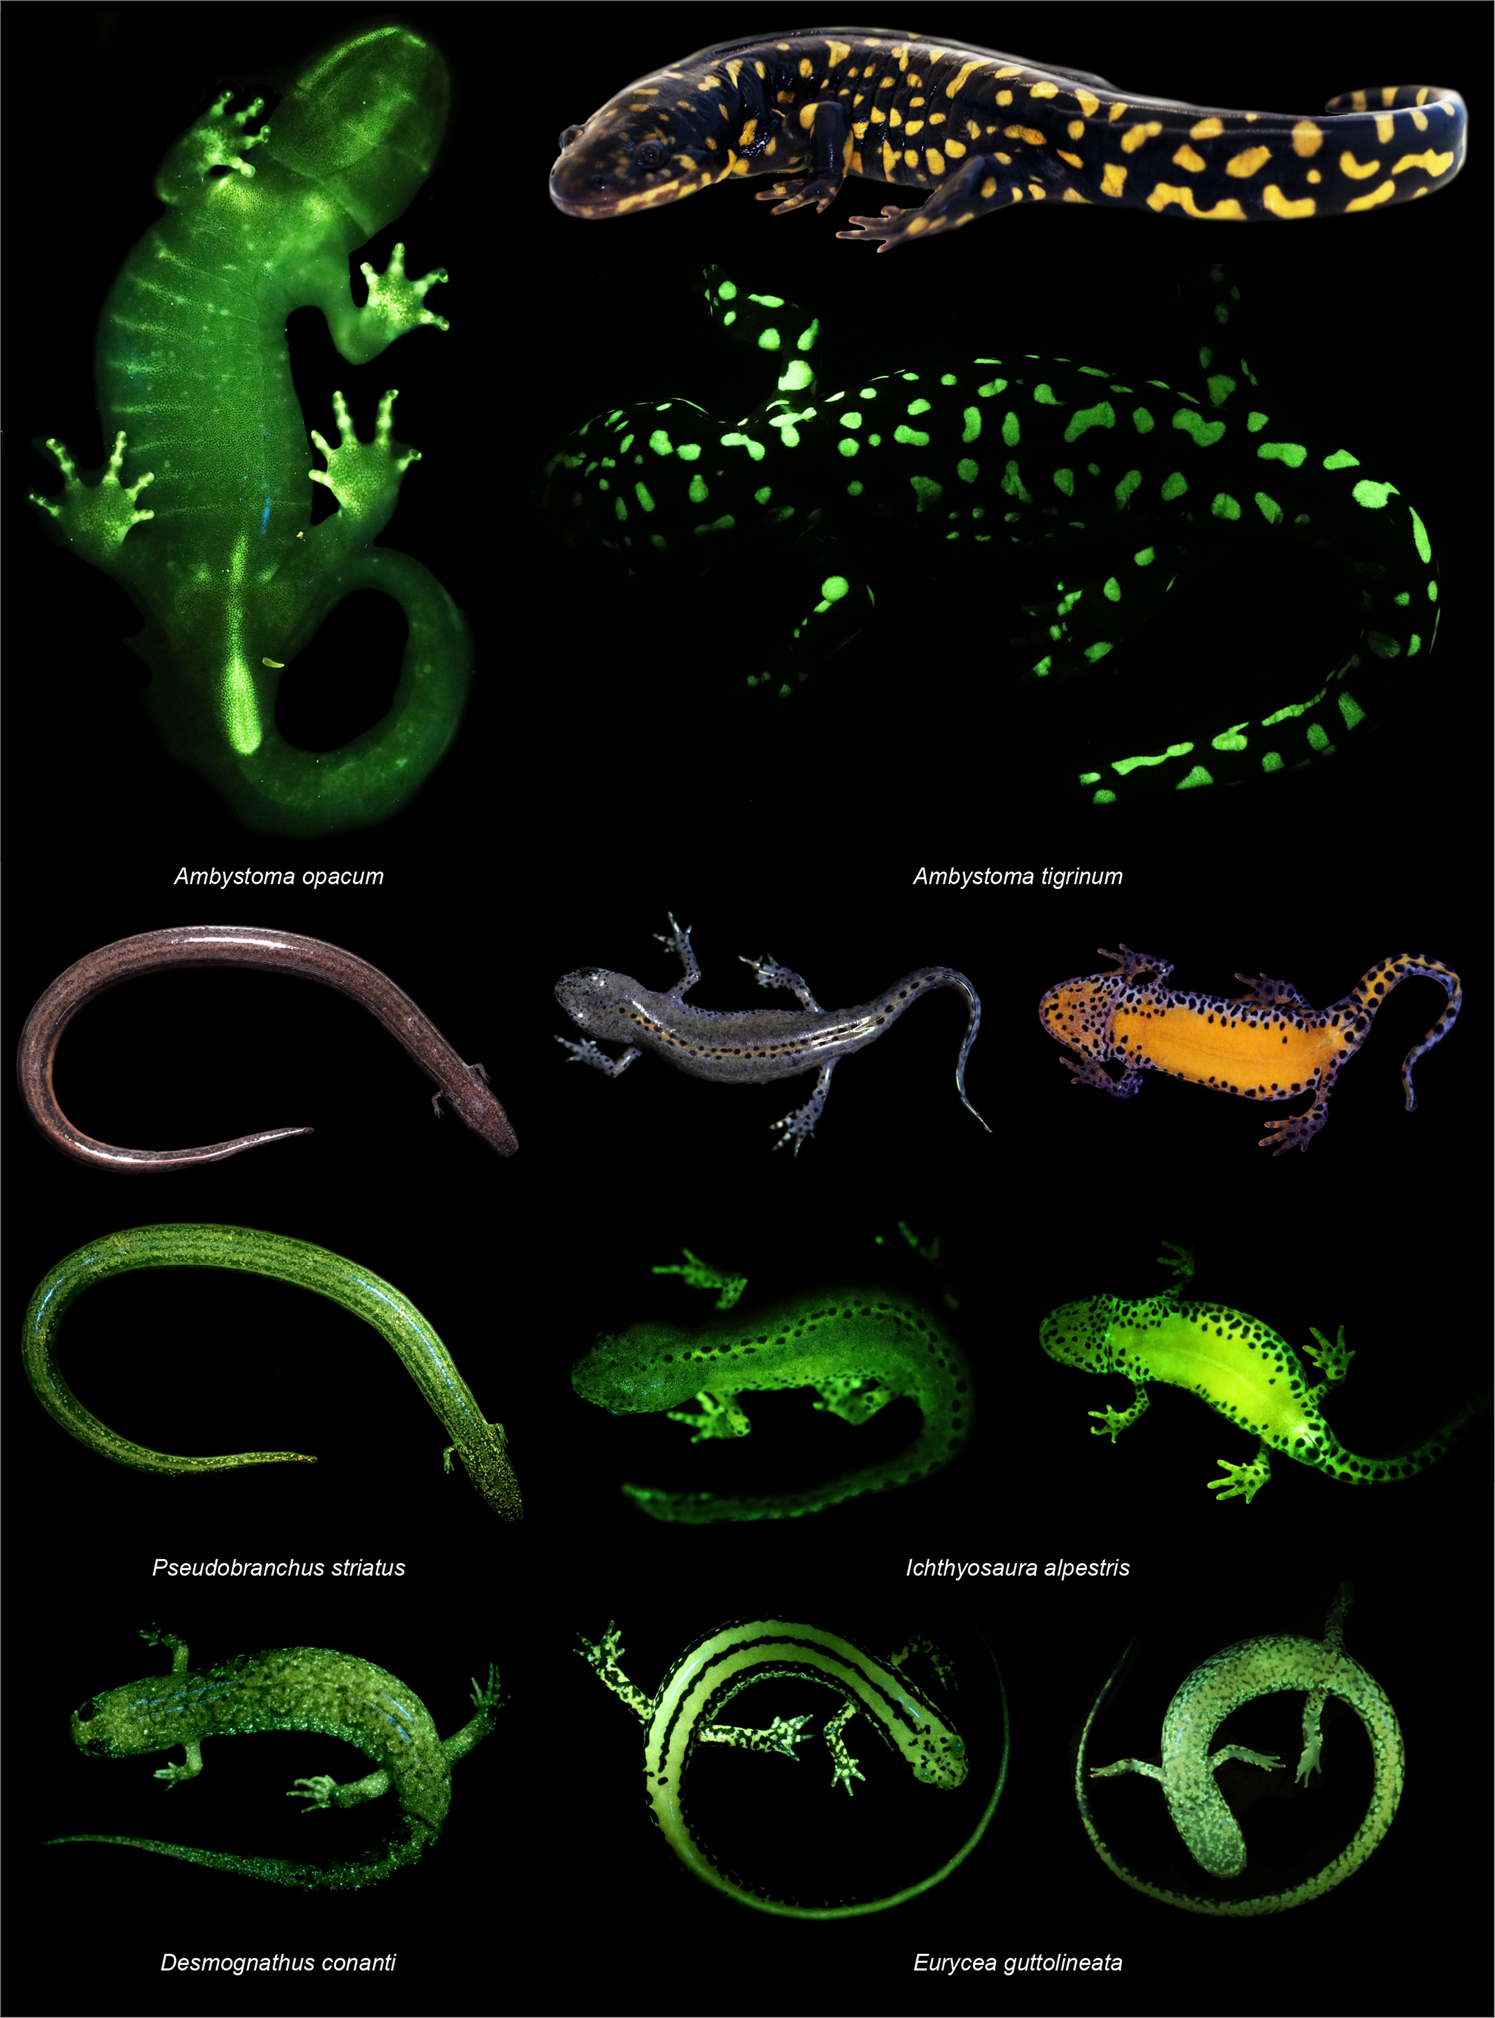 What are some examples of amphibians with biofluorescence?